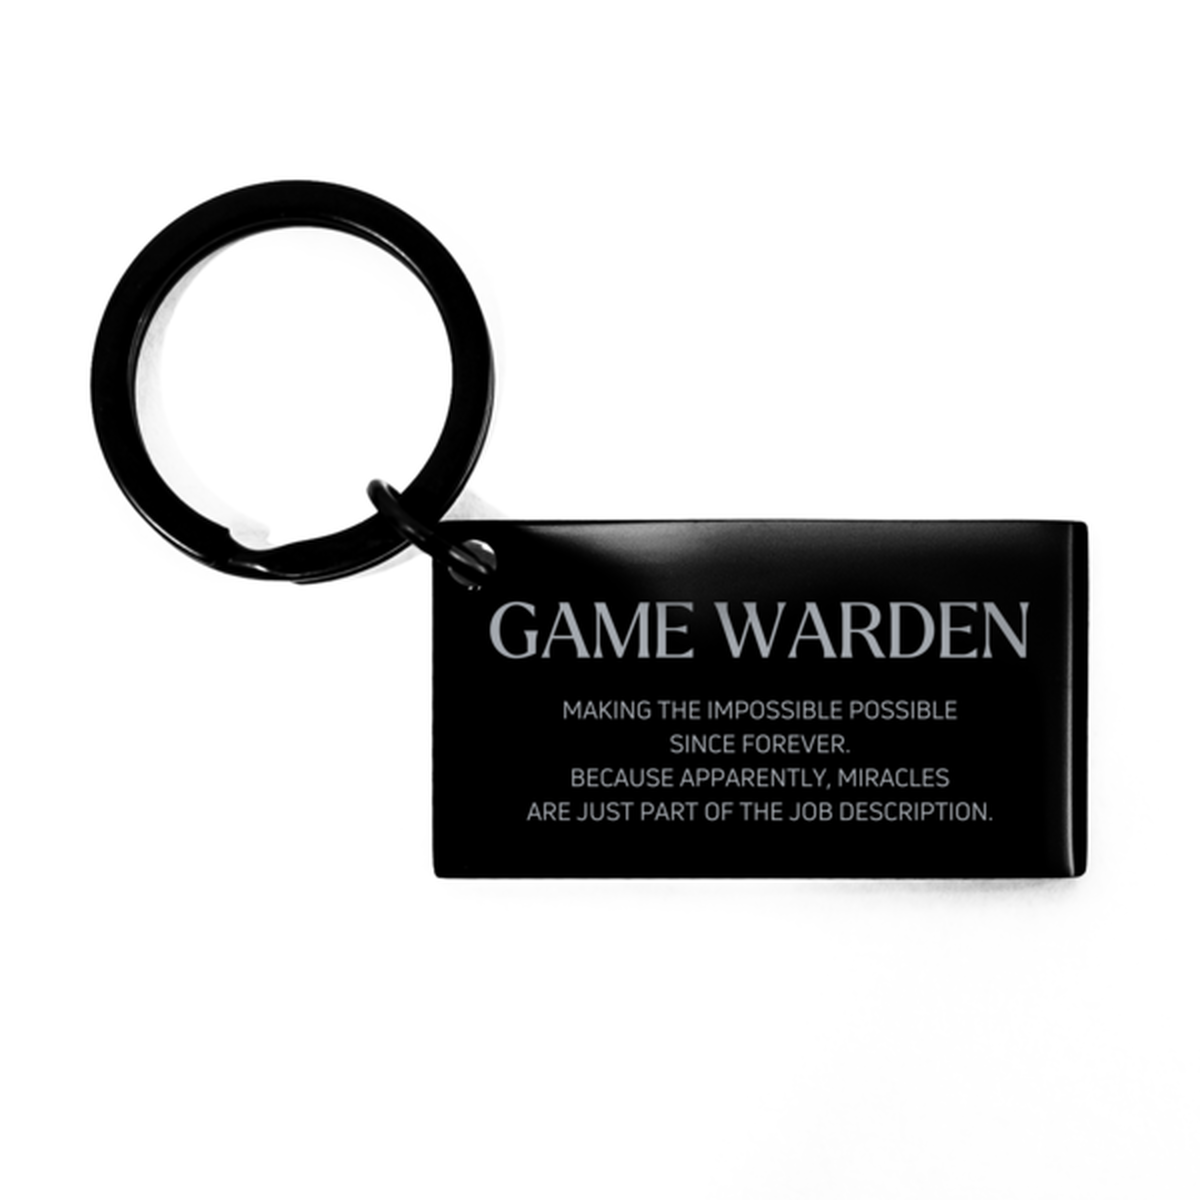 Funny Game Warden Gifts, Miracles are just part of the job description, Inspirational Birthday Keychain For Game Warden, Men, Women, Coworkers, Friends, Boss